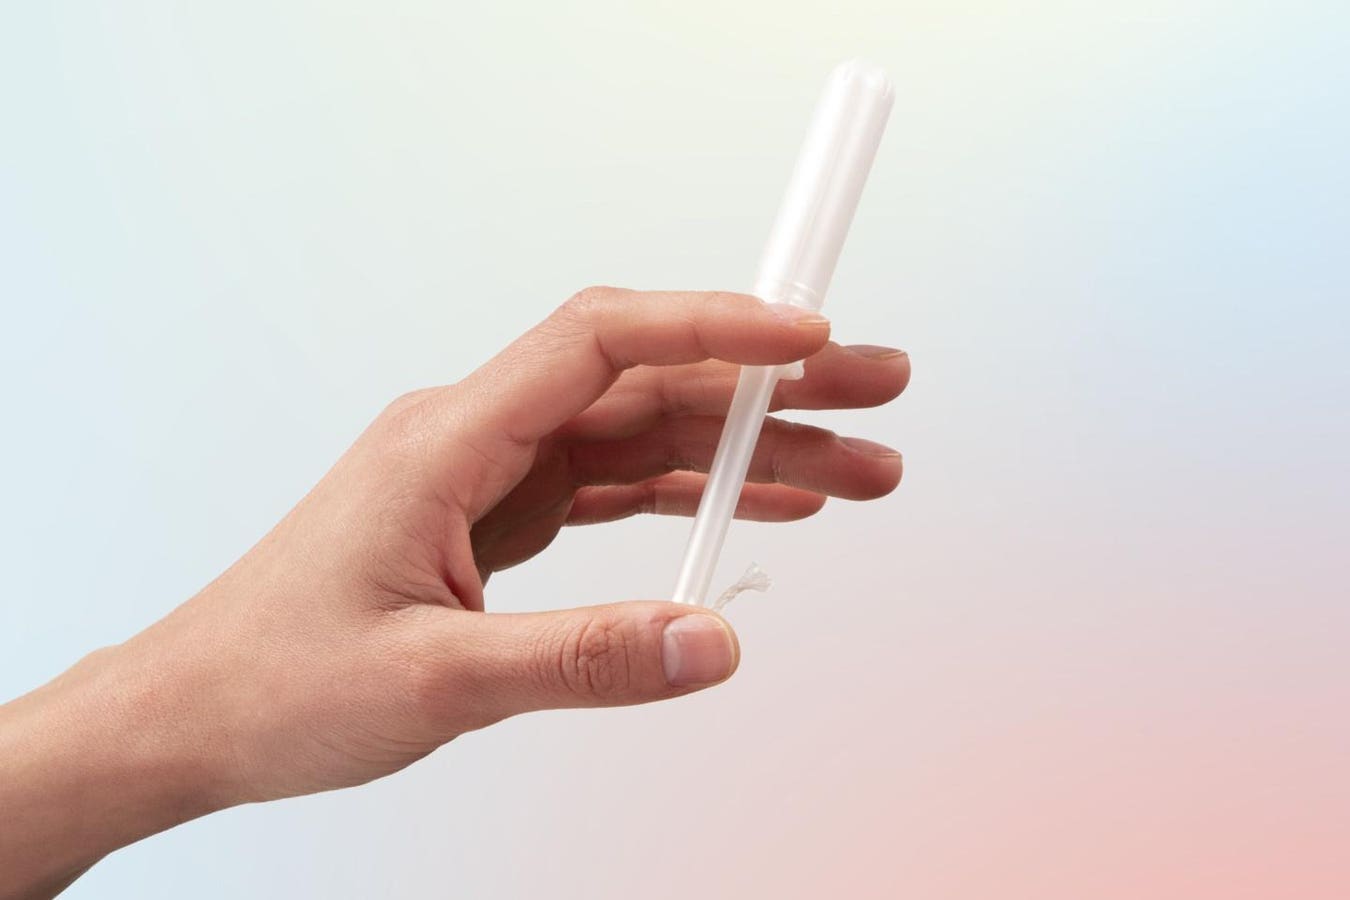 U.K. Startup Launches HPV Testing Tampons To Fight Cervical Cancer